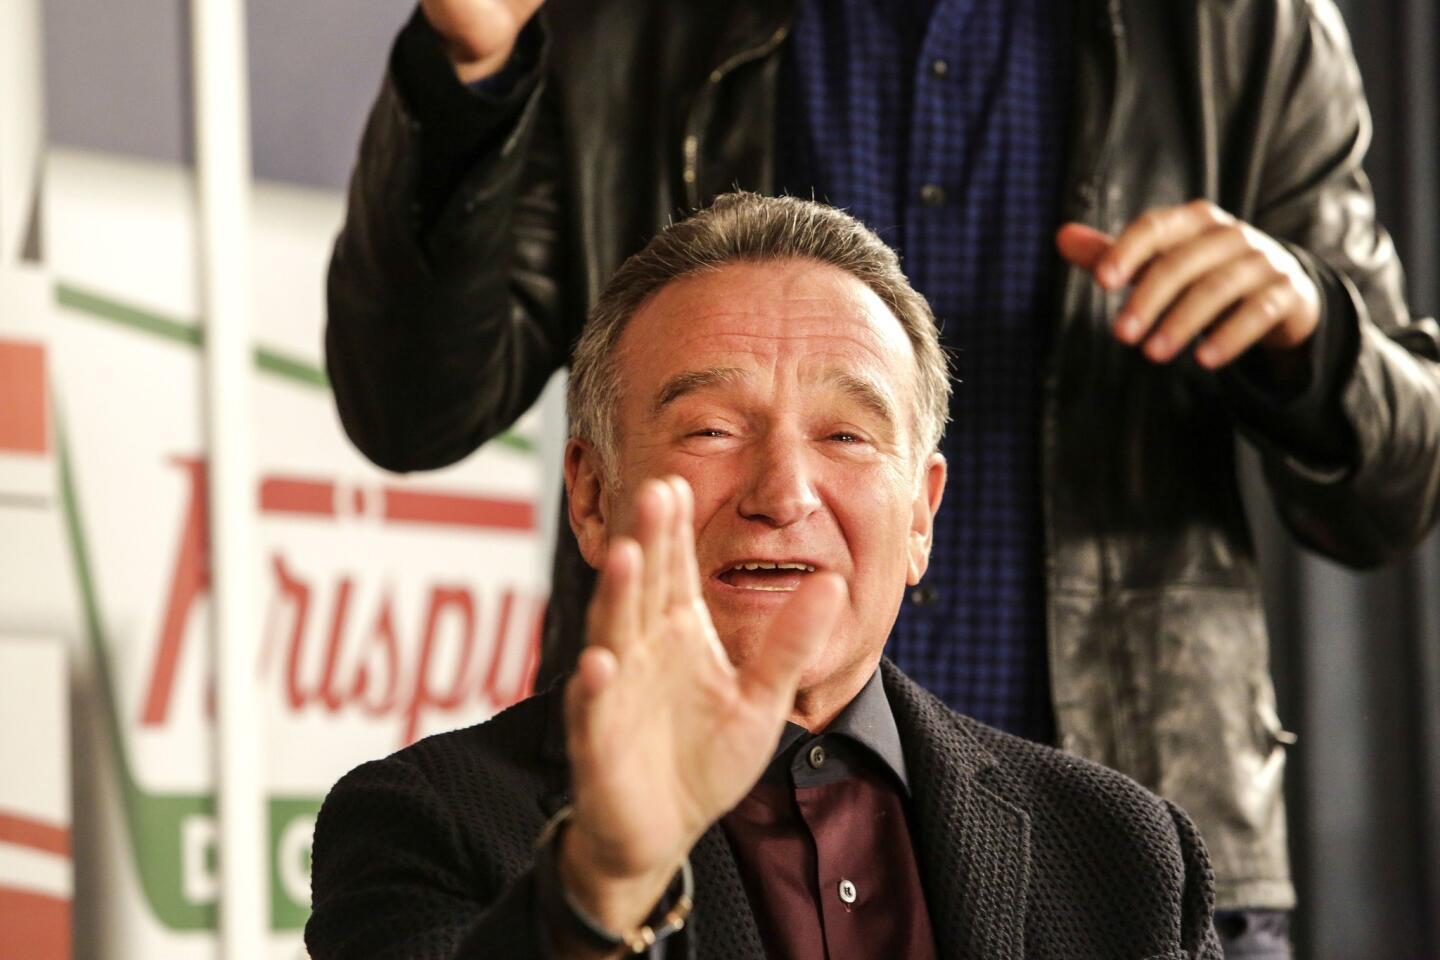 Robin Williams in rehab, but not because of relapse